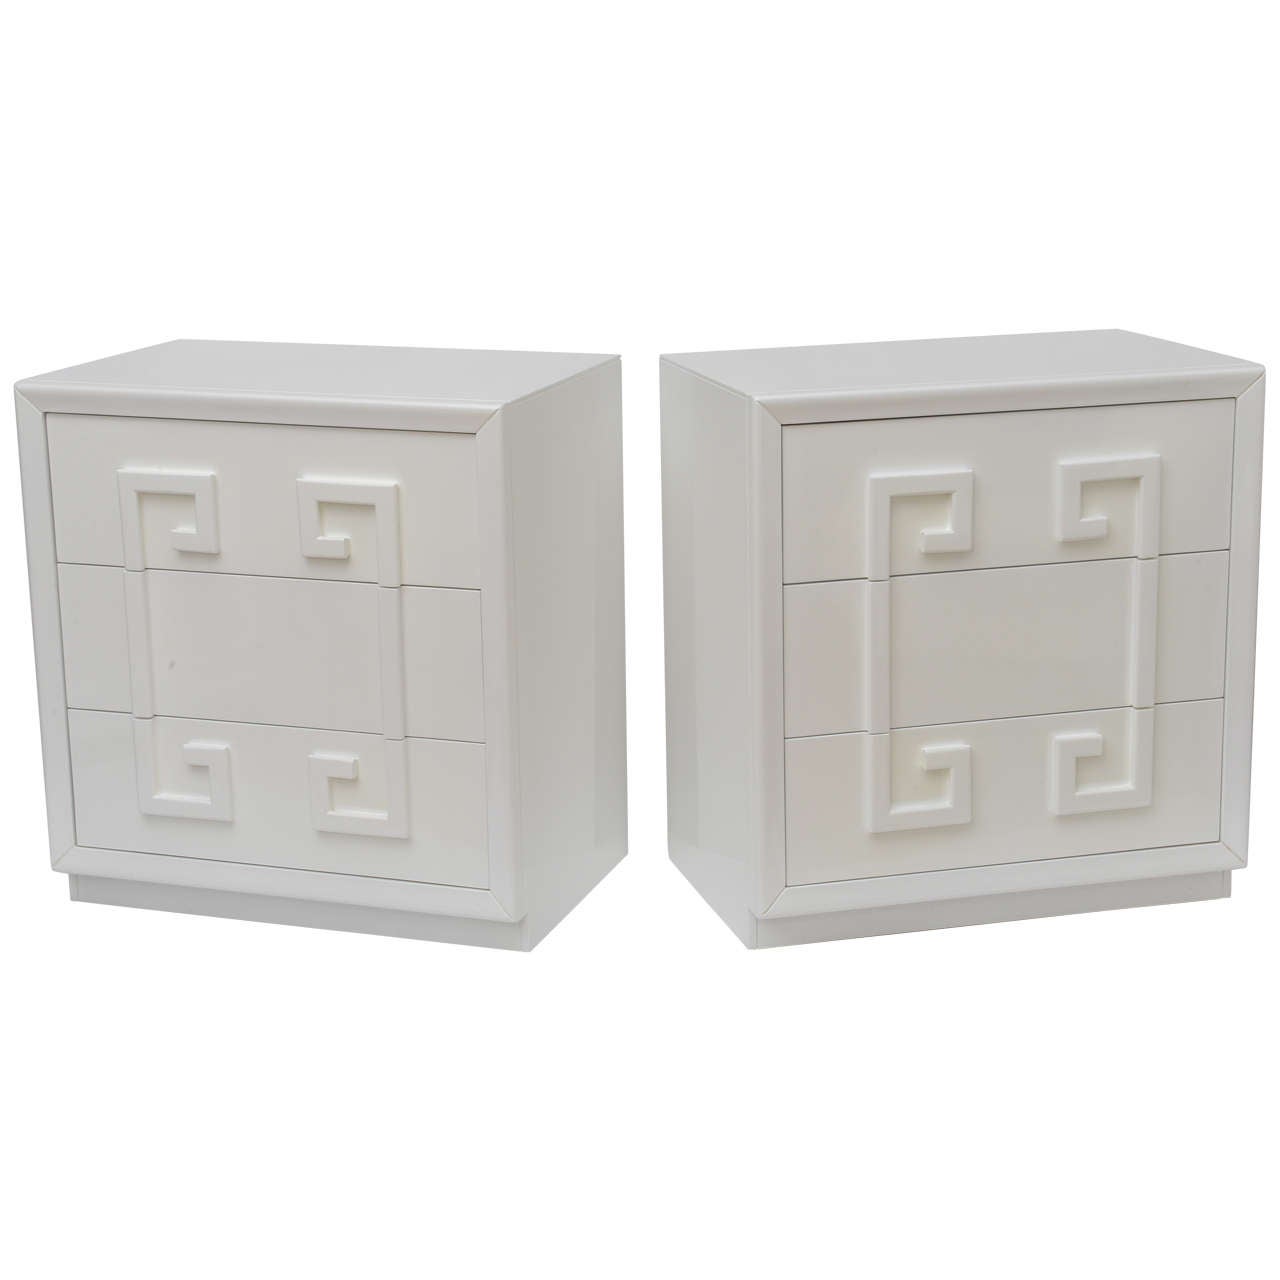 Pair of three drawer bachelors chests superbly finished inside and out in high gloss white lacquer. Greek key raised design, in the Kittinger style, incorporates all three drawers and evokes memories of a bygone era of glamour and high style. Great